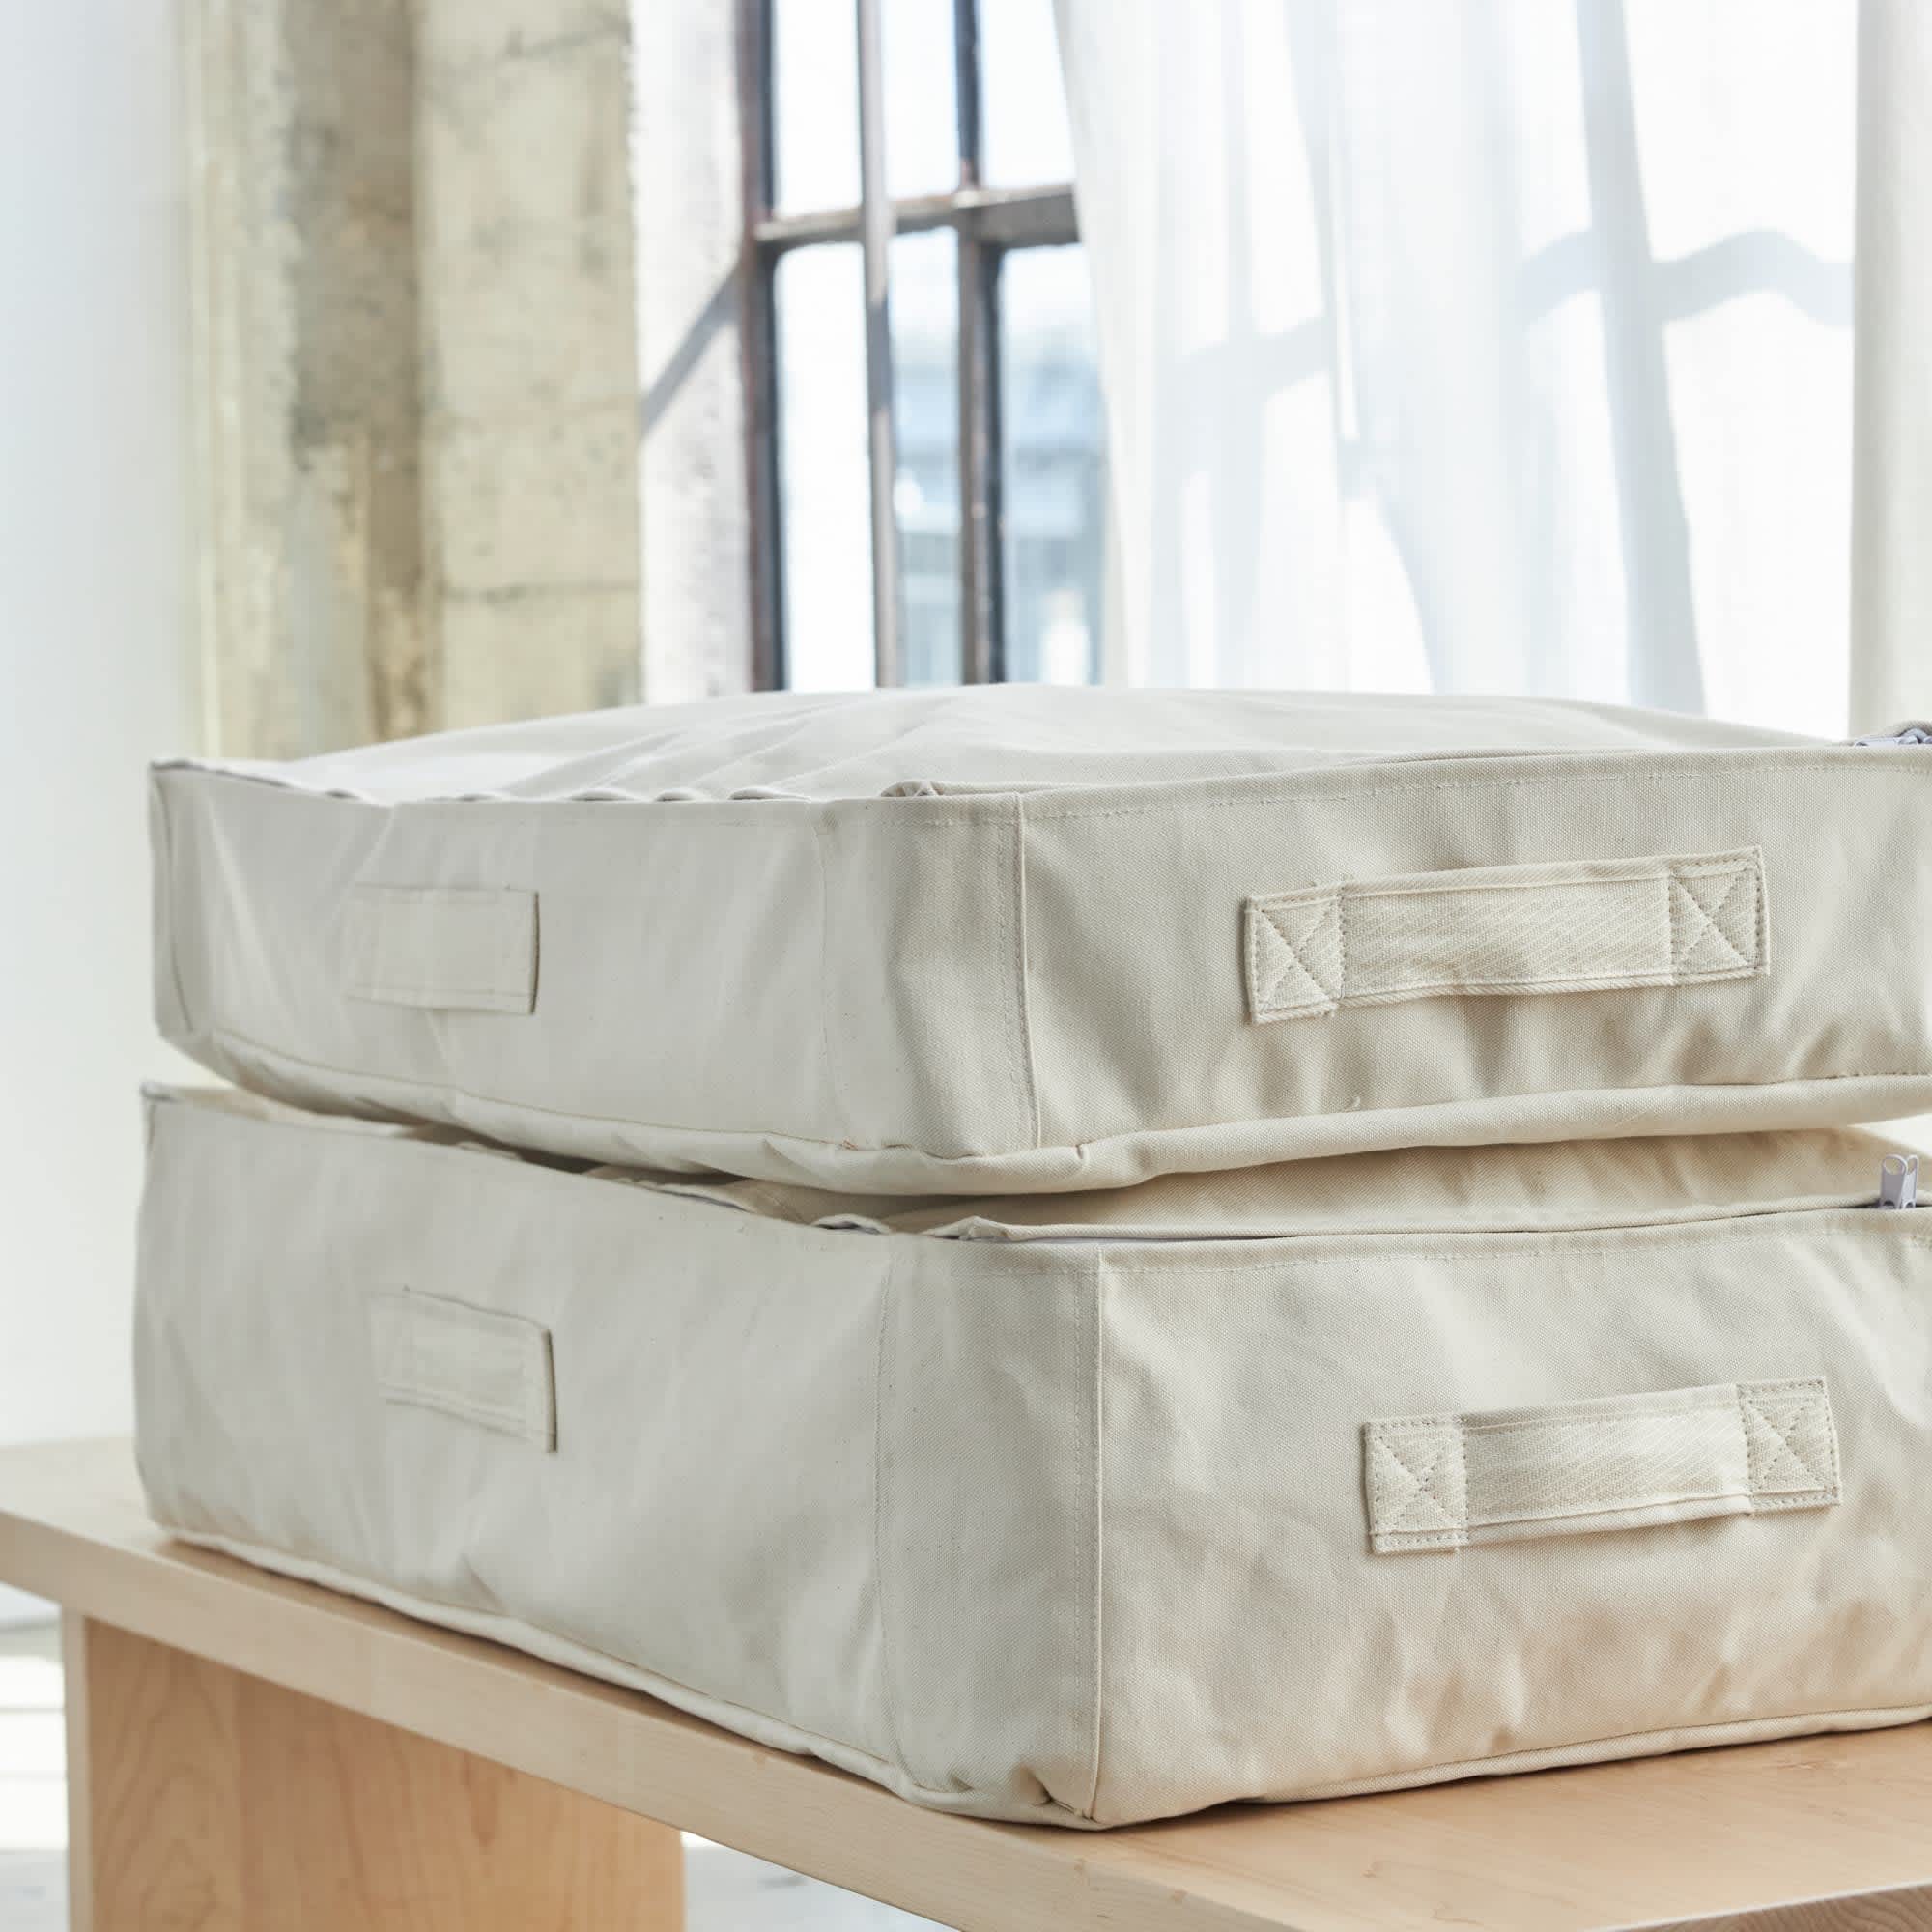 10 Best Under Bed Storage Bins for Your Home